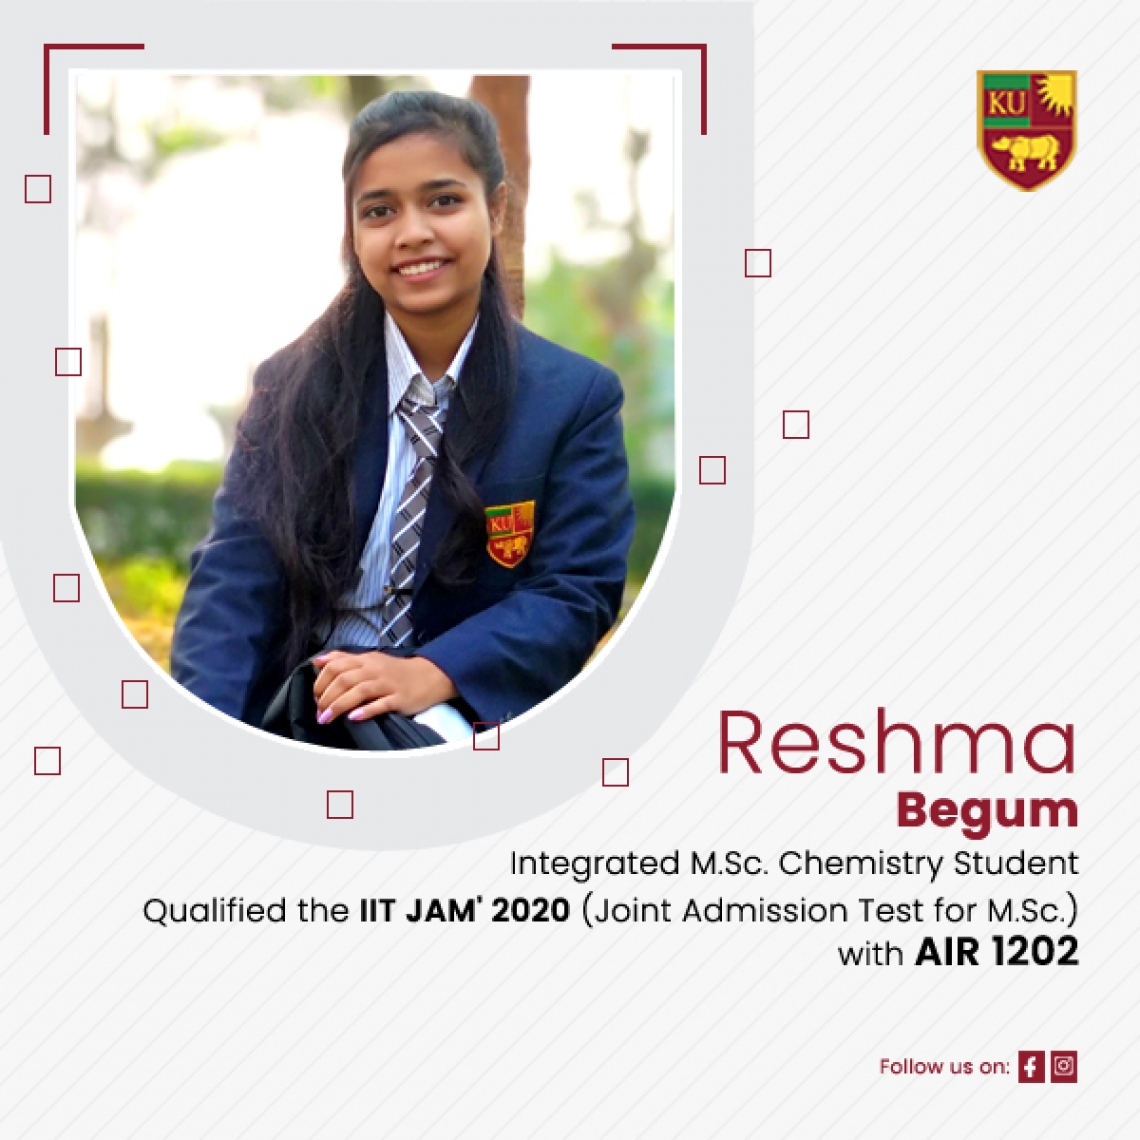 KU student from Integrated Msc. Chemistry qualifies the IIT JAM 2020